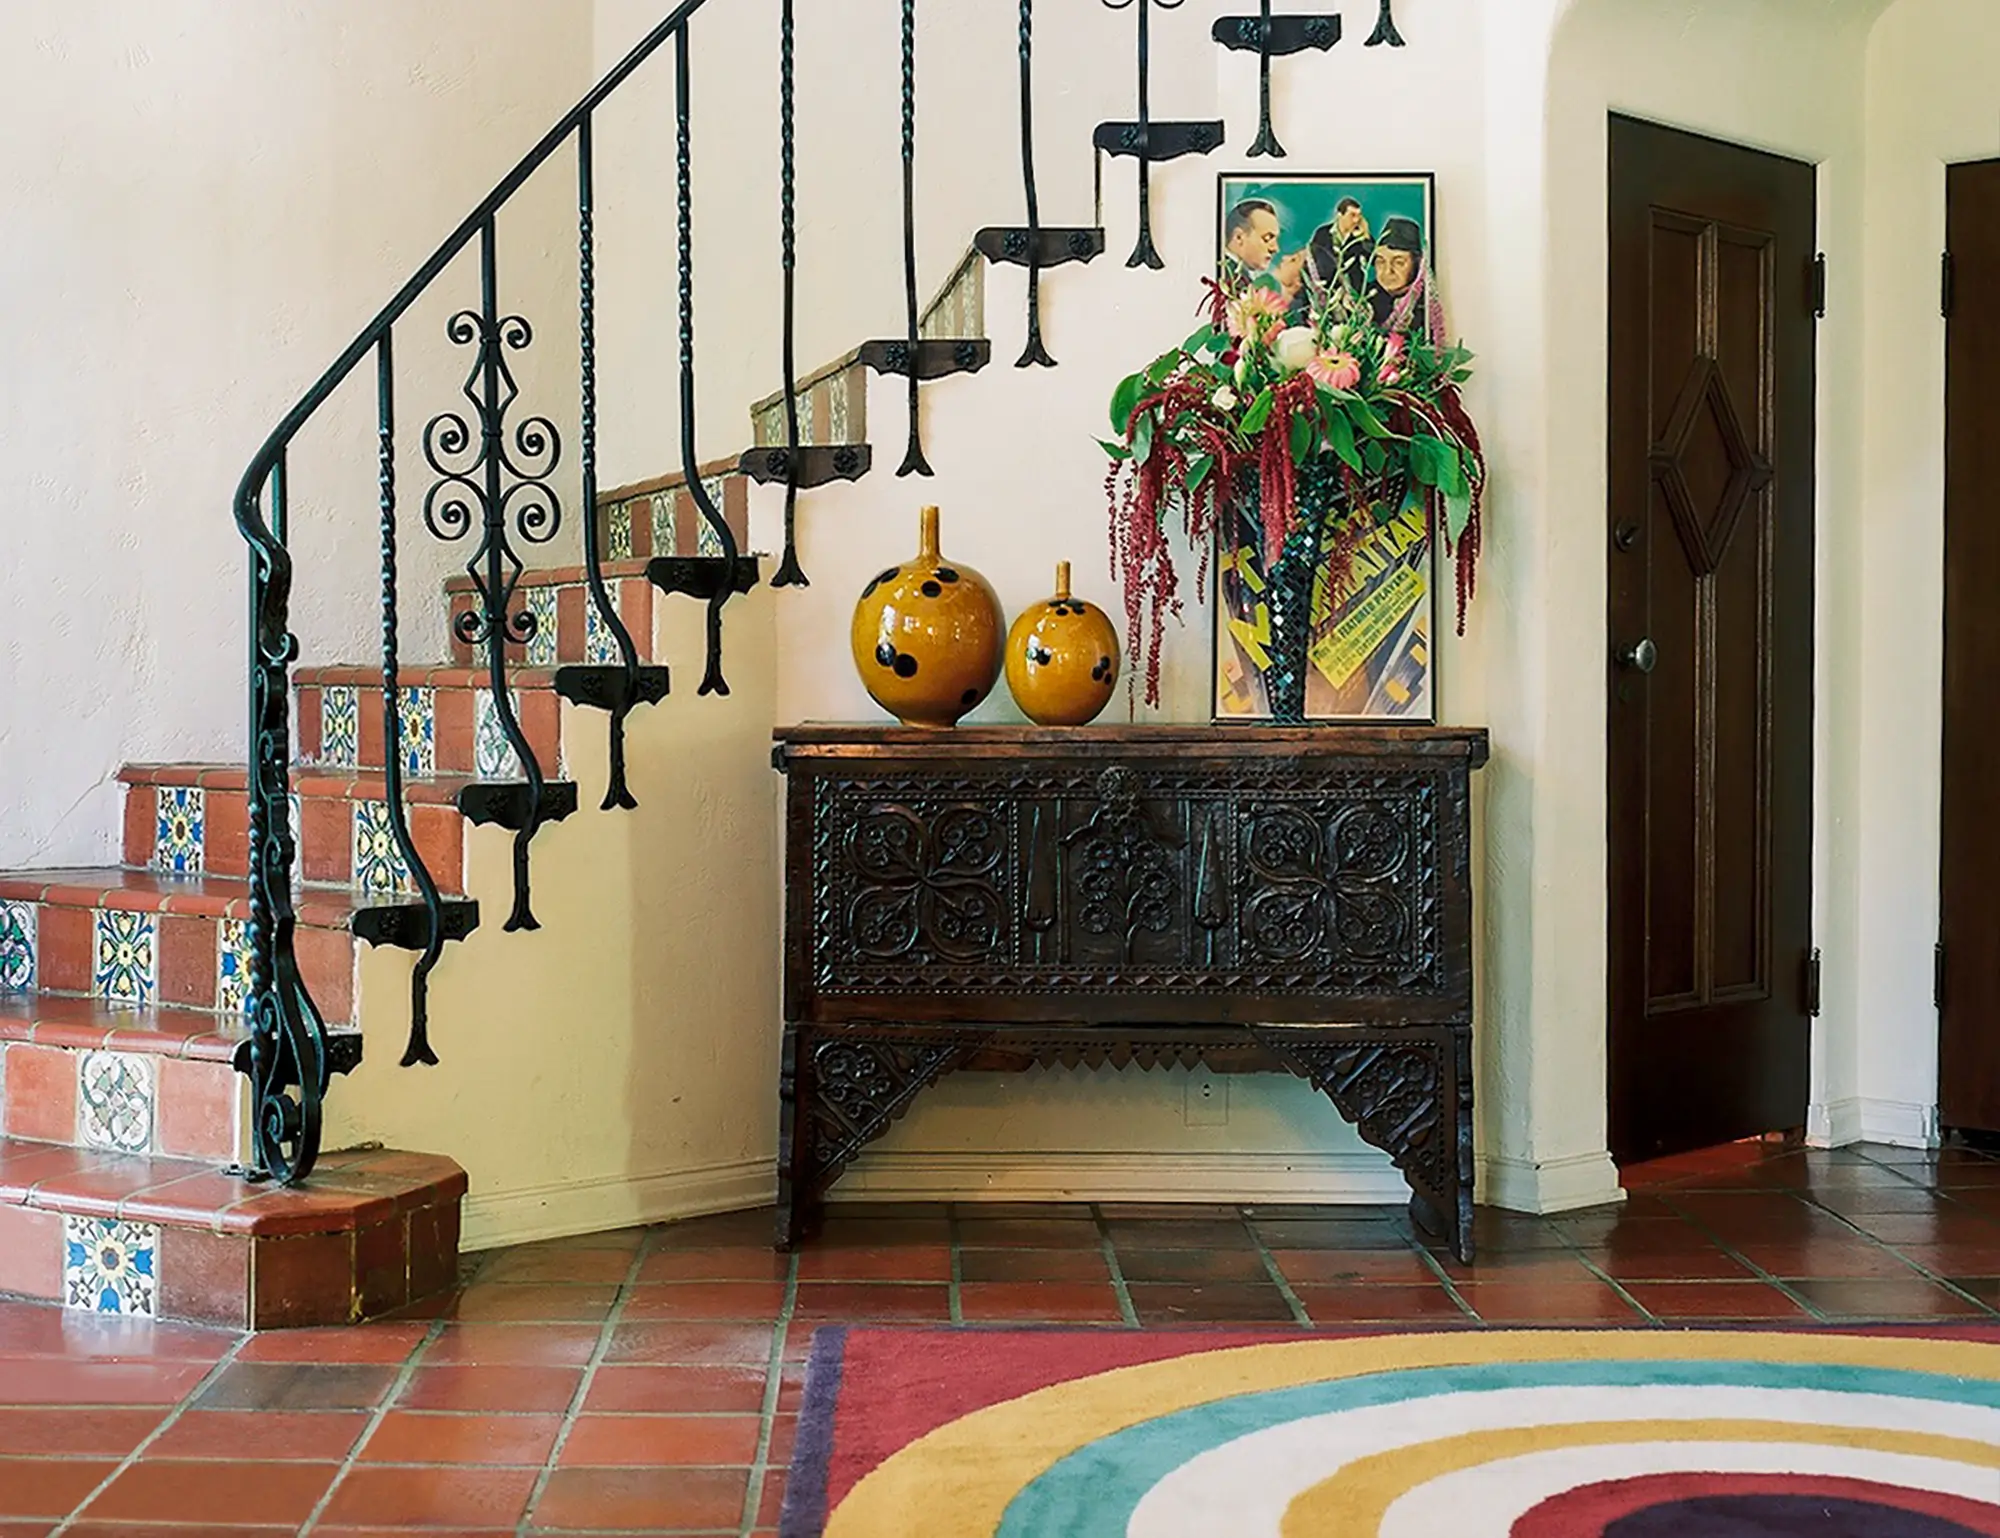 The entry way of an impressive Spanish Revival home showing a mix of period-accurate & modern design details